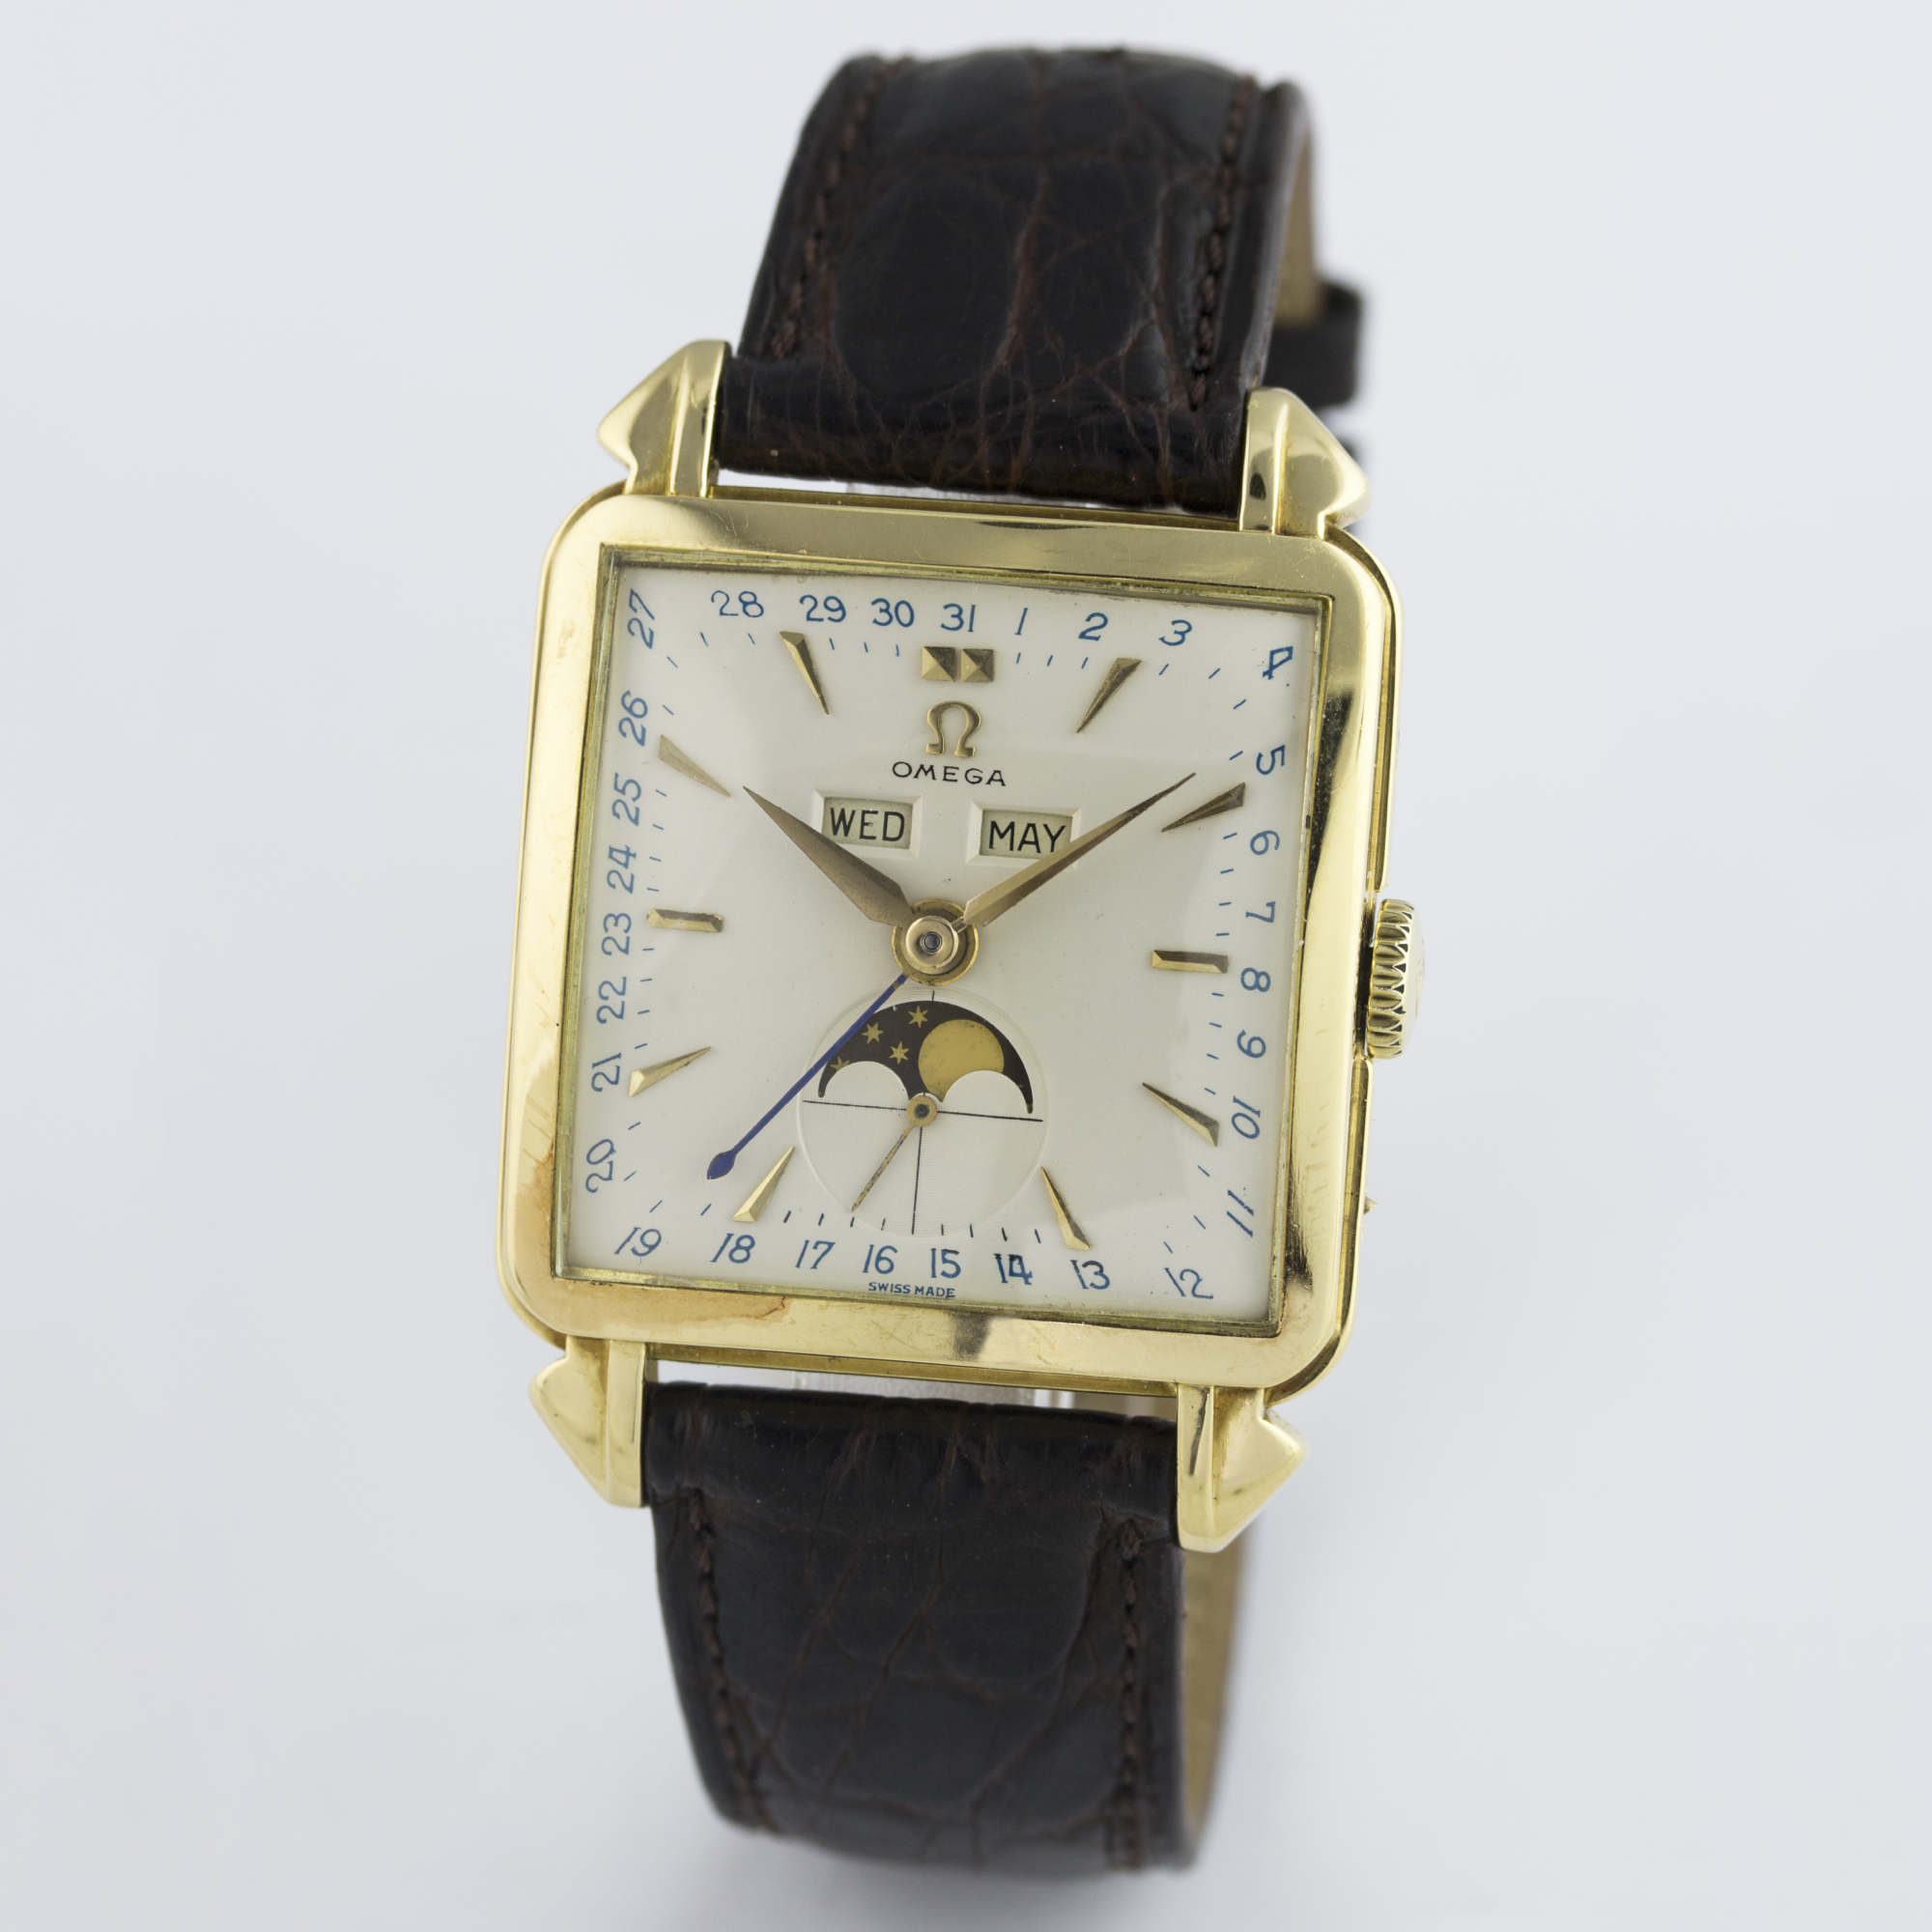 A RARE GENTLEMAN'S 18K SOLID GOLD OMEGA COSMIC MOONPHASE TRIPLE CALENDAR WRIST WATCH CIRCA 1951 D: - Image 3 of 9